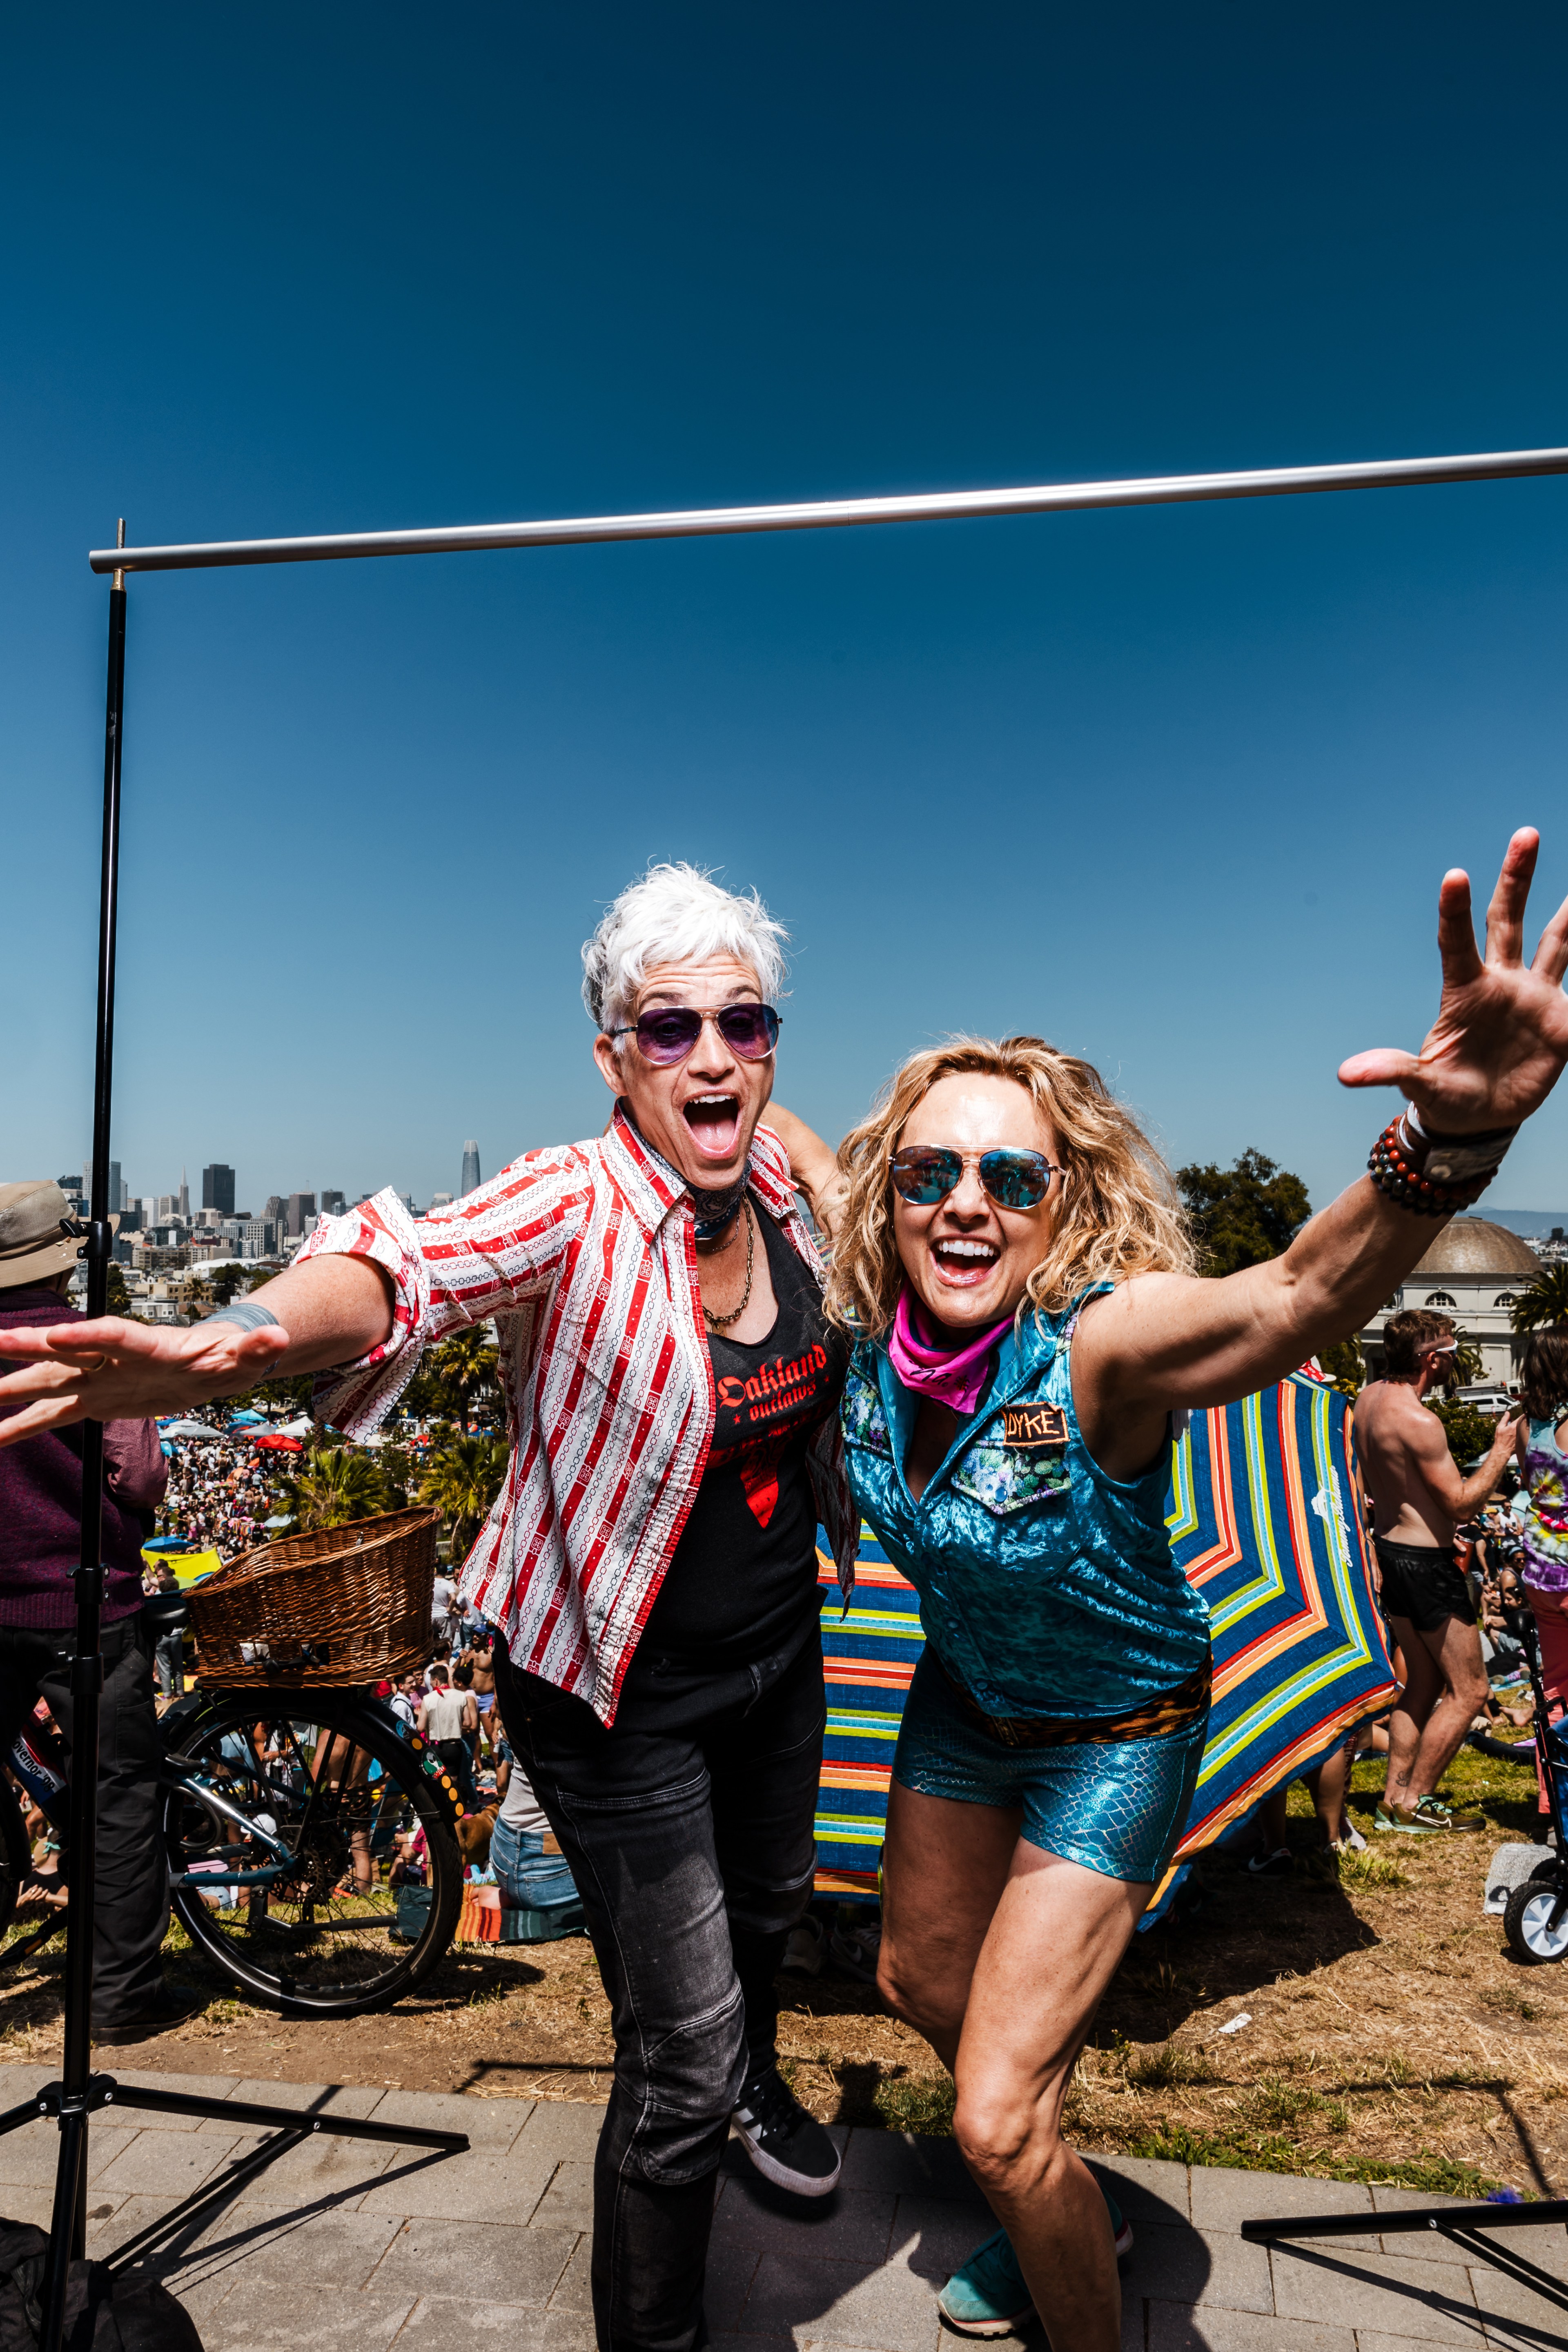 Two people with outstretched arms in colorful outfits and sunglasses are excitedly posing at an outdoor event, with a crowd, bicycles, and umbrellas in the background.